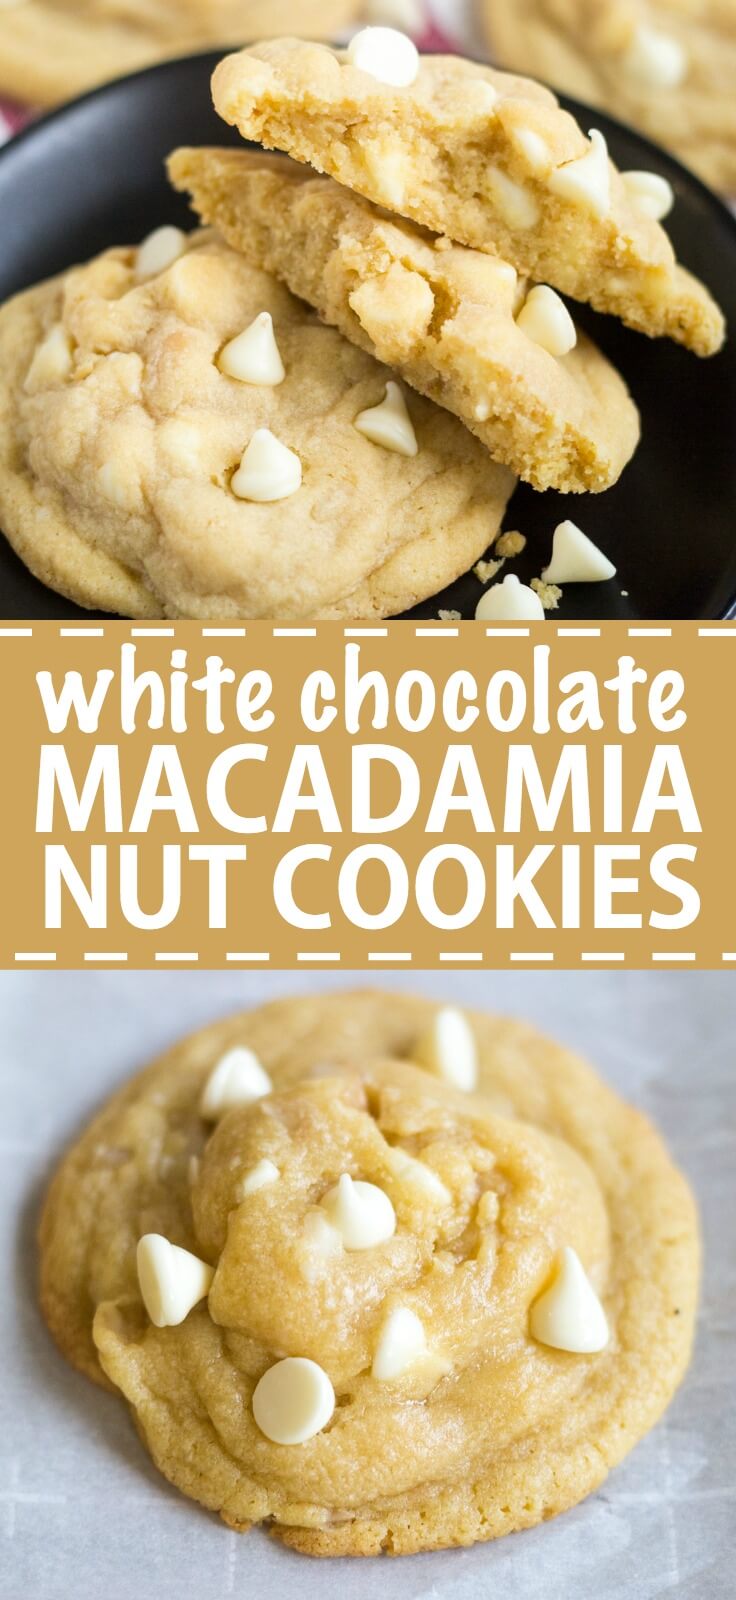 Thick, soft and chewy, these white chocolate macadamia nut cookies are a delicious addition to your cookie list. They’re so easy to make and they freeze really well!